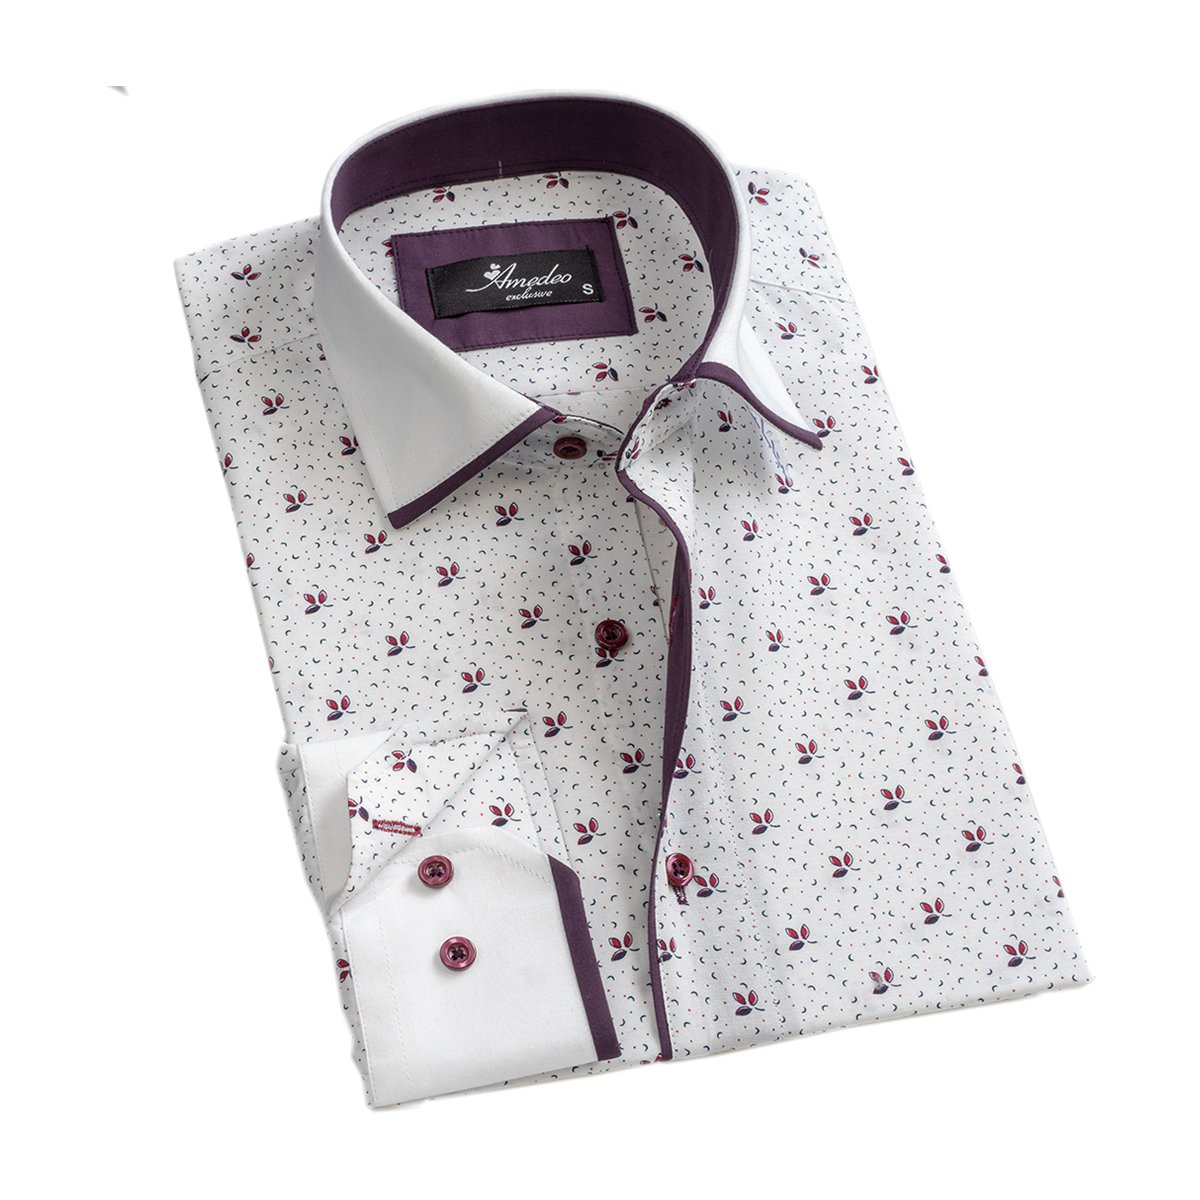 white dress shirt for office suits